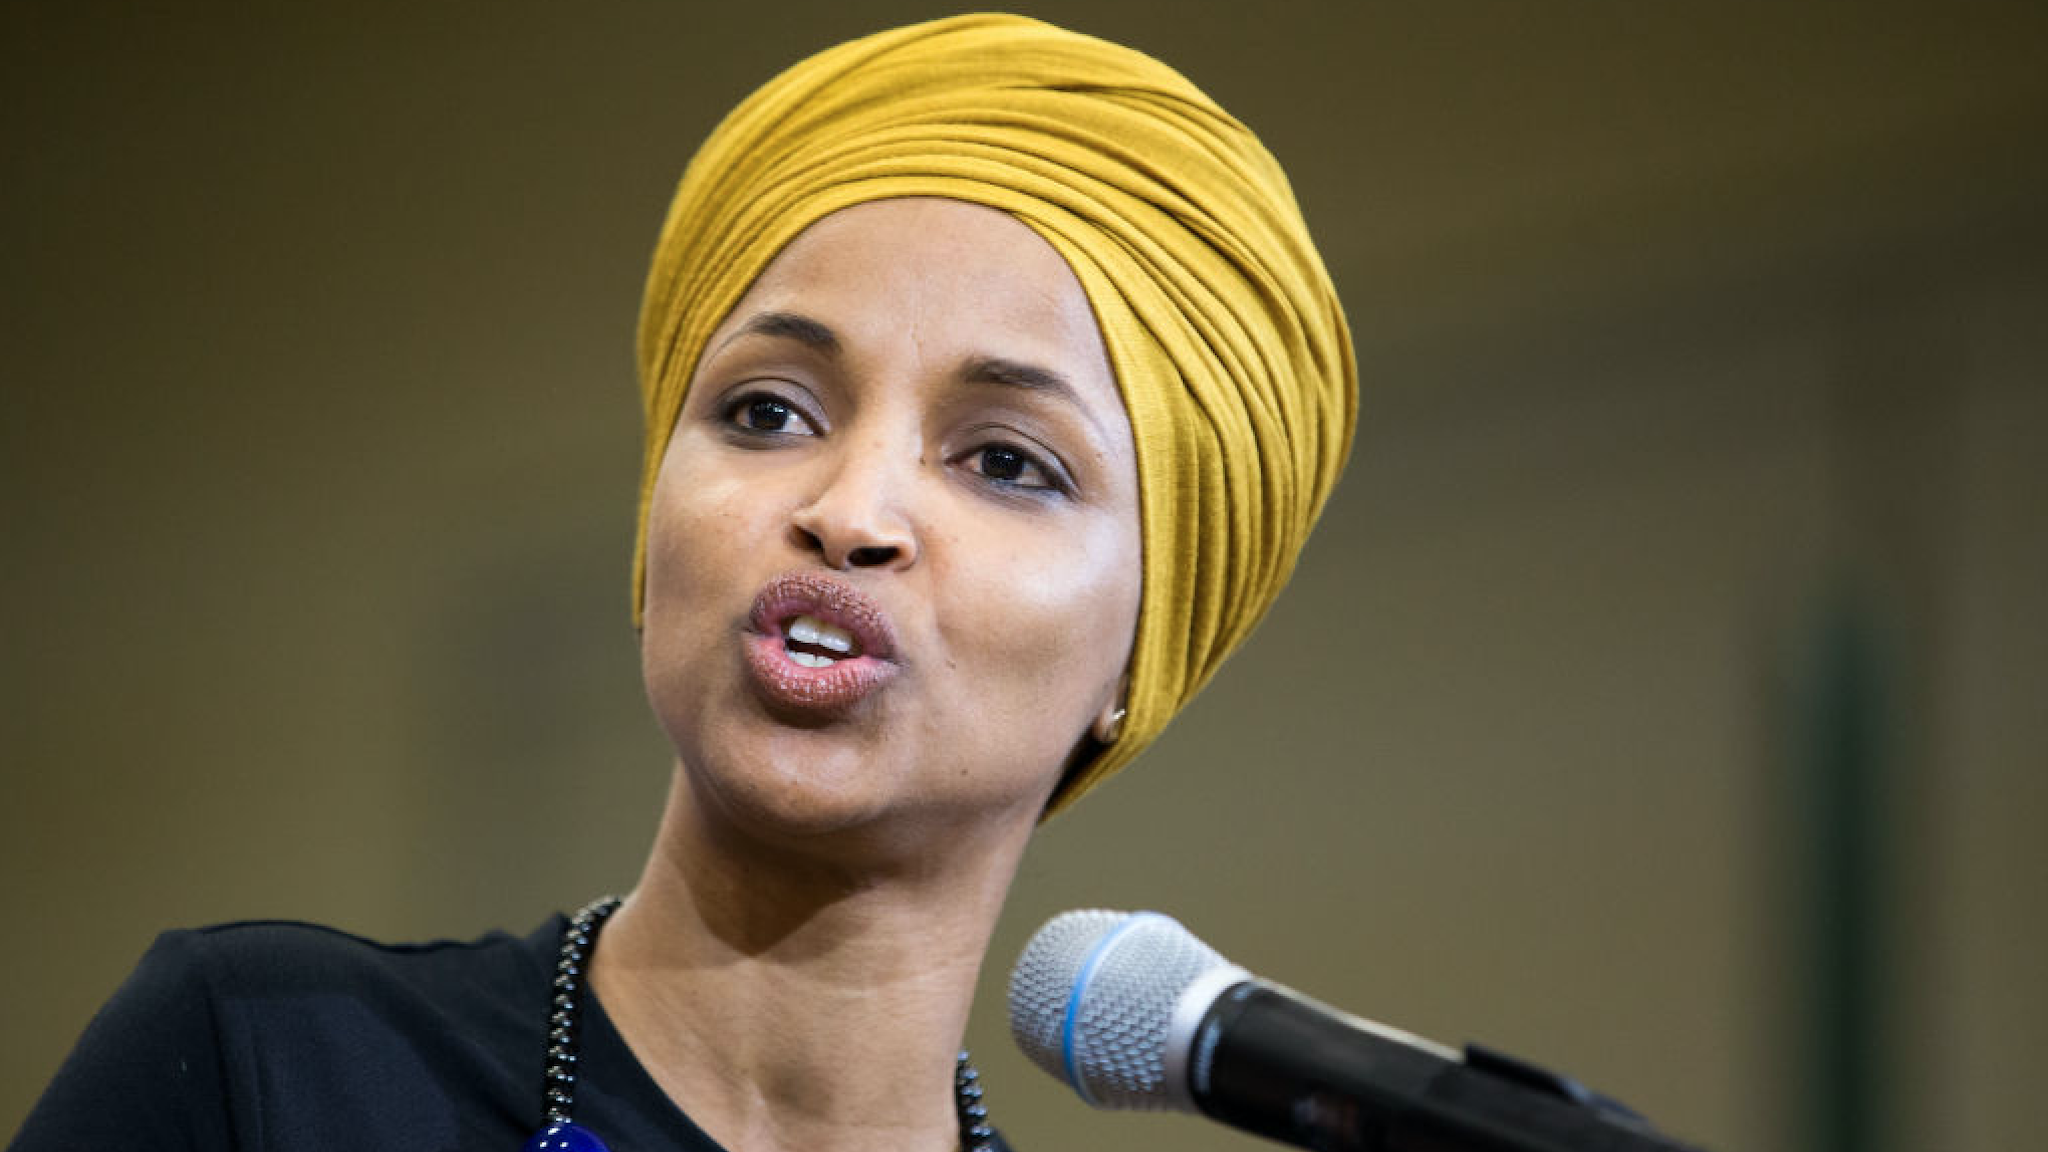 Representative Ilhan Omar (D-MN) speaks at a campaign rally for Senator (I-VT) and presidential candidate Bernie Sanders at Nashua Community College on December 13, 2019 in Nashua, New Hampshire.